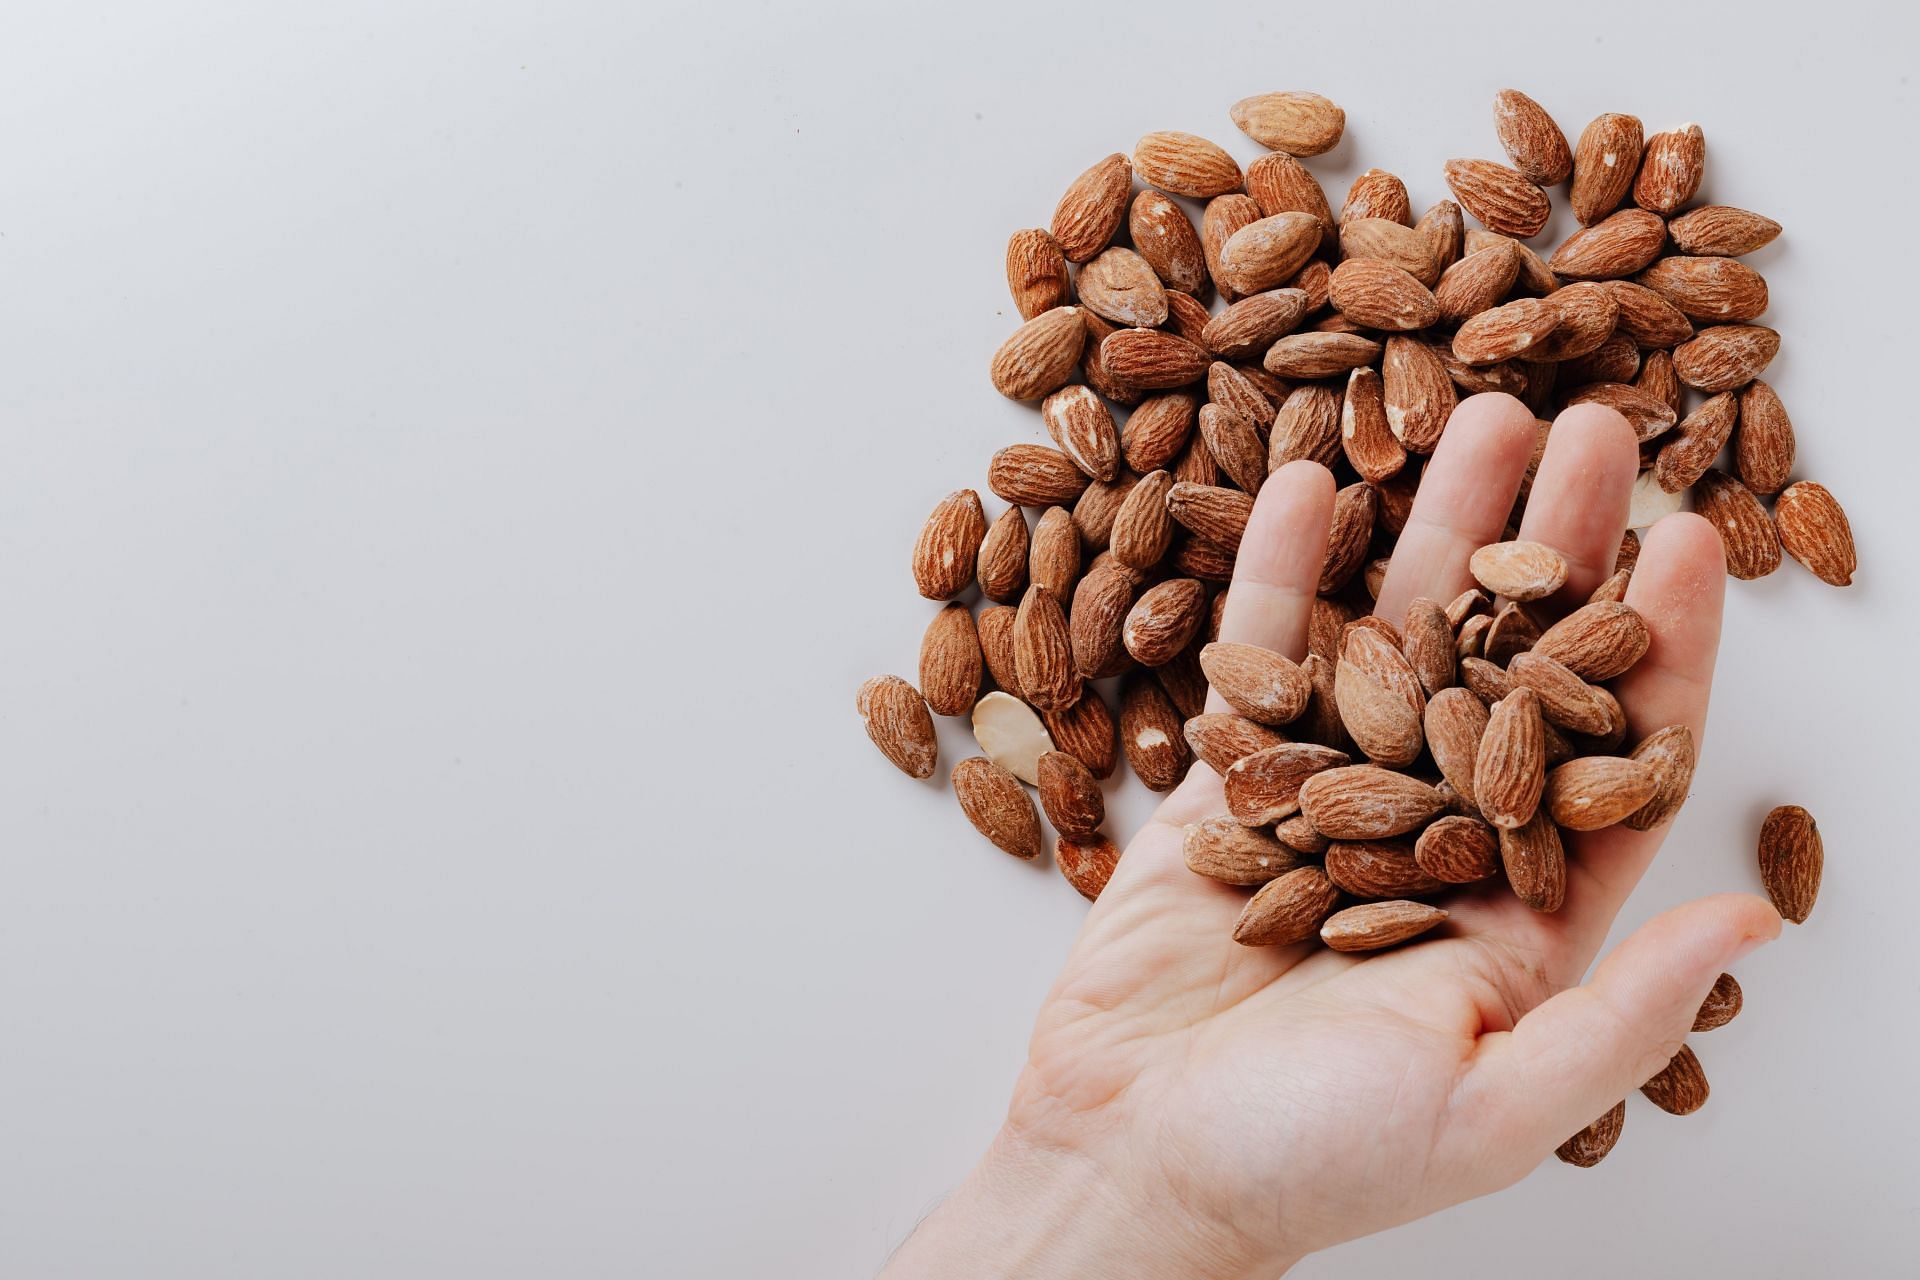 Almonds are high in minerals, vitamins, proteins, fibers, and other nutrients (Image via Pexels/Karolina Grabowska)